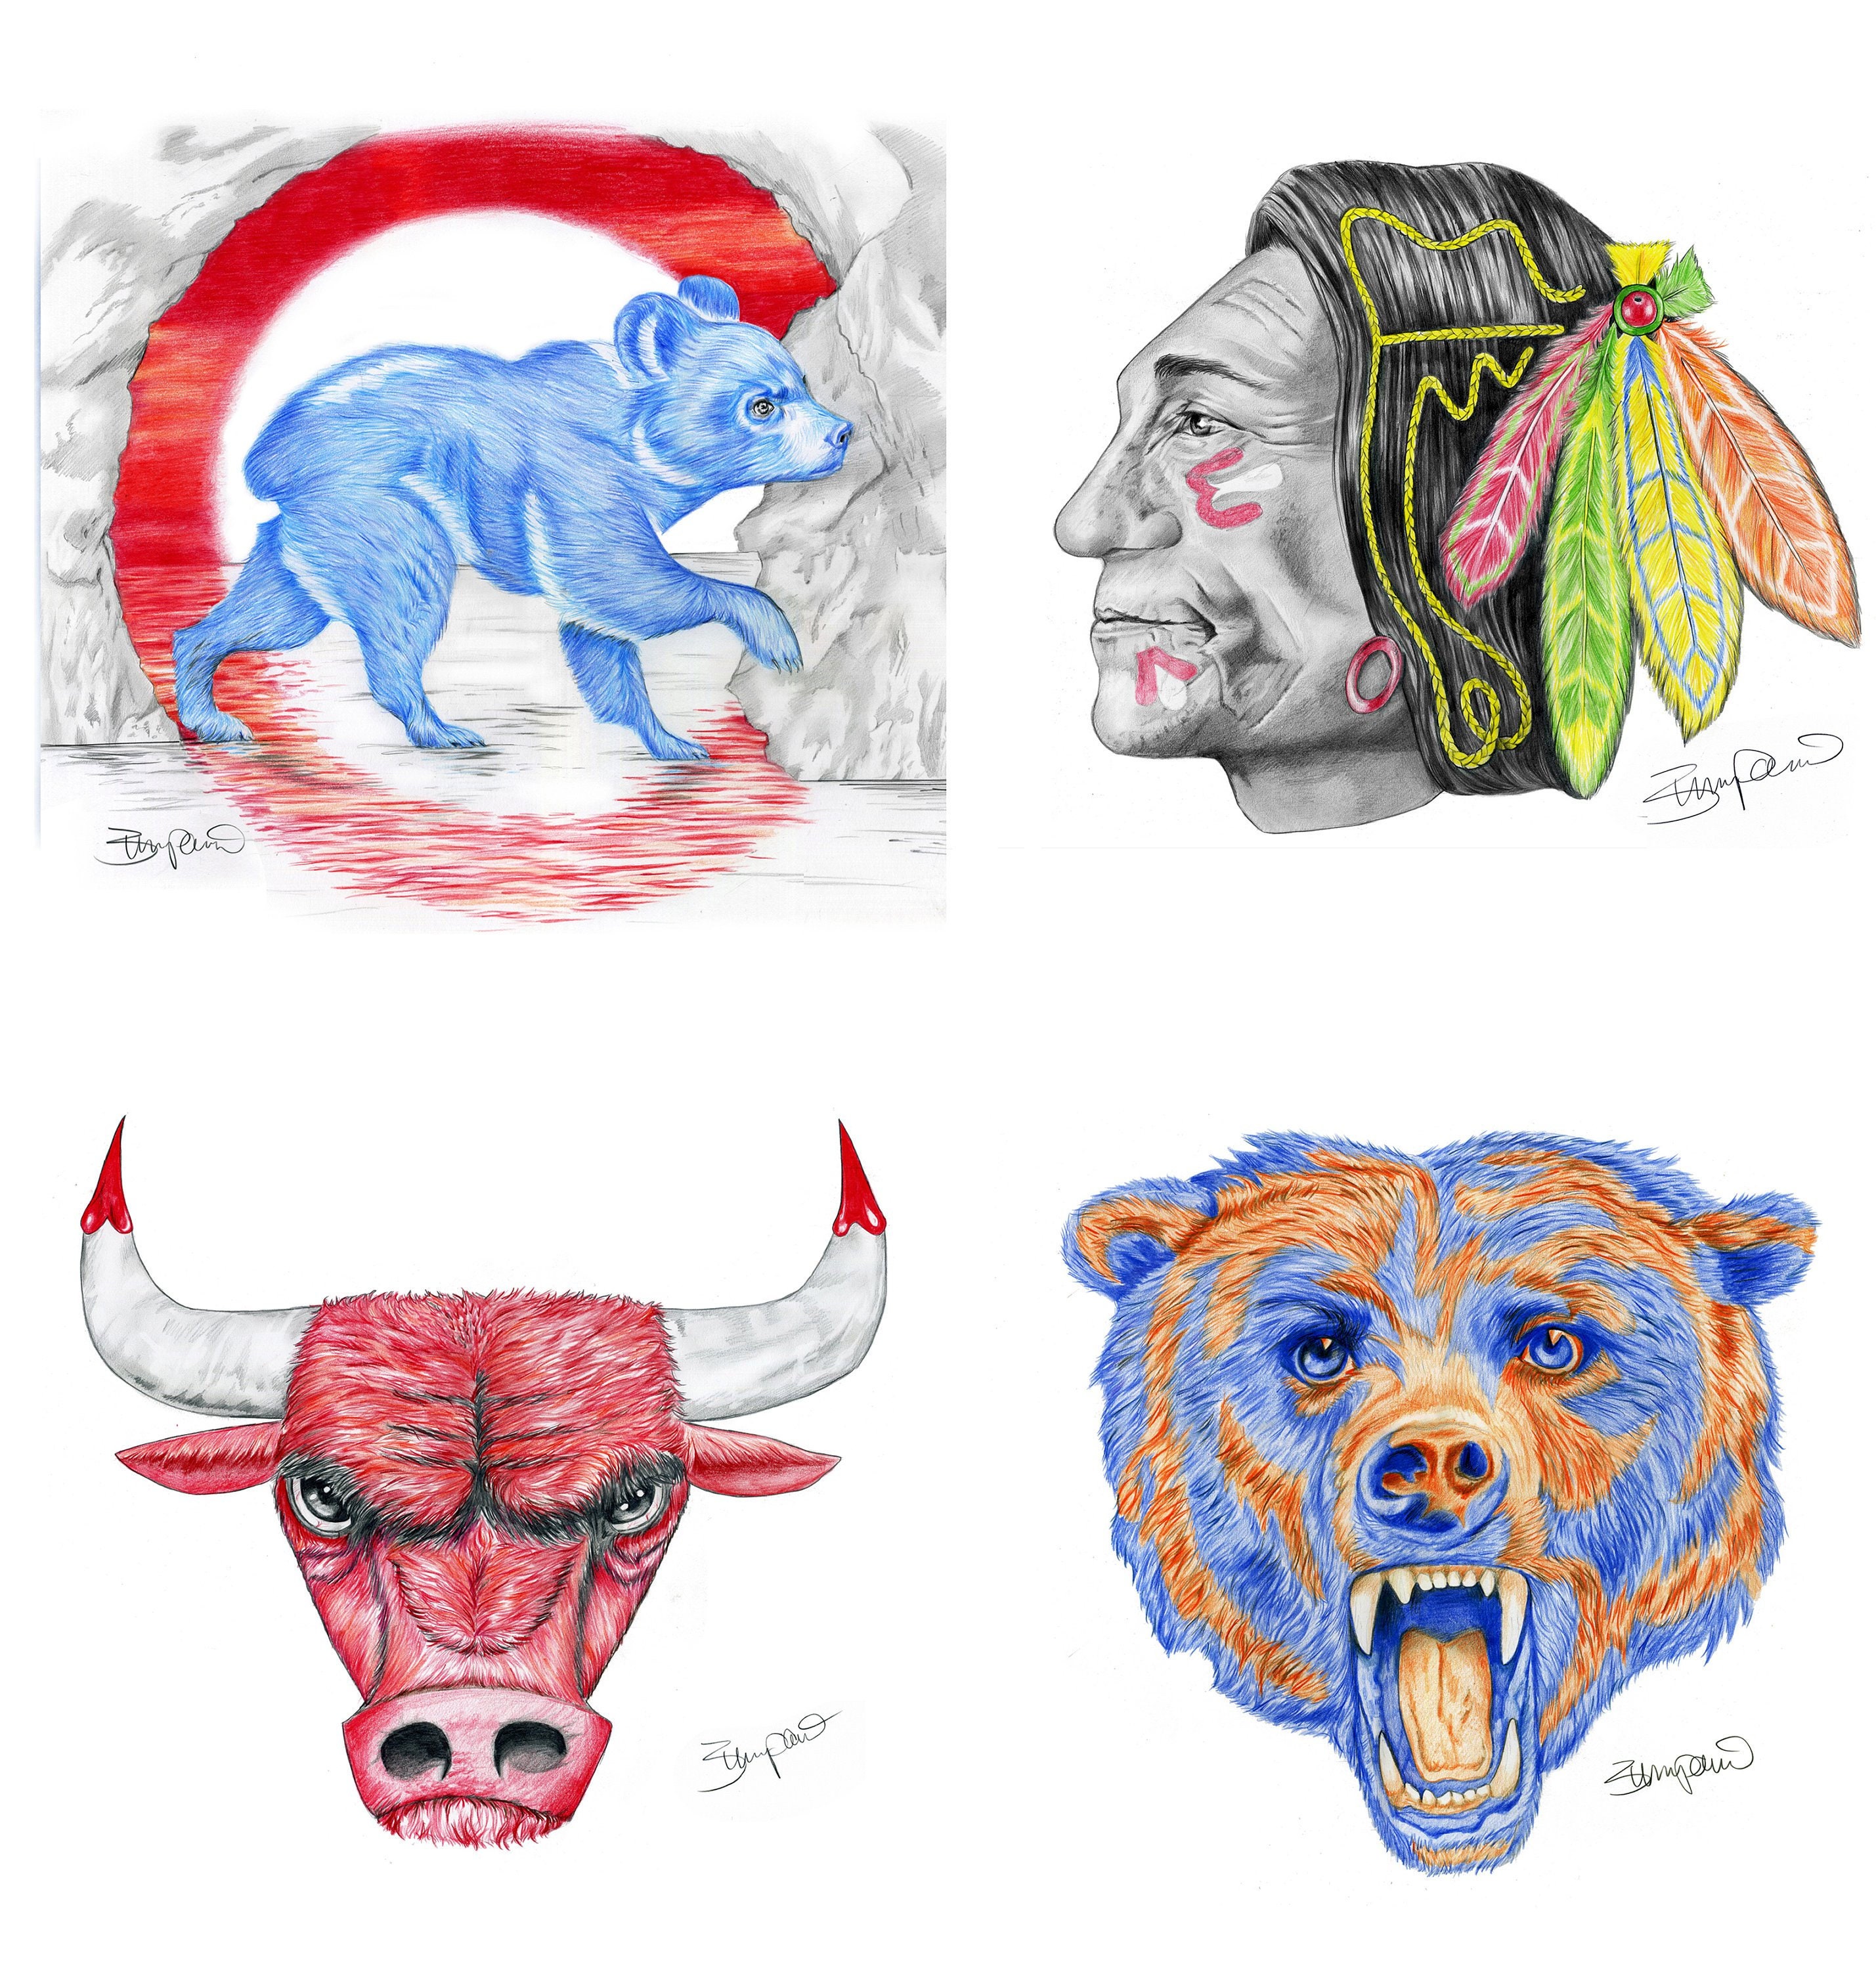 Chicago Sports Logos Combined Cubs, Bulls, Bears Blackhawks - Pick A Size